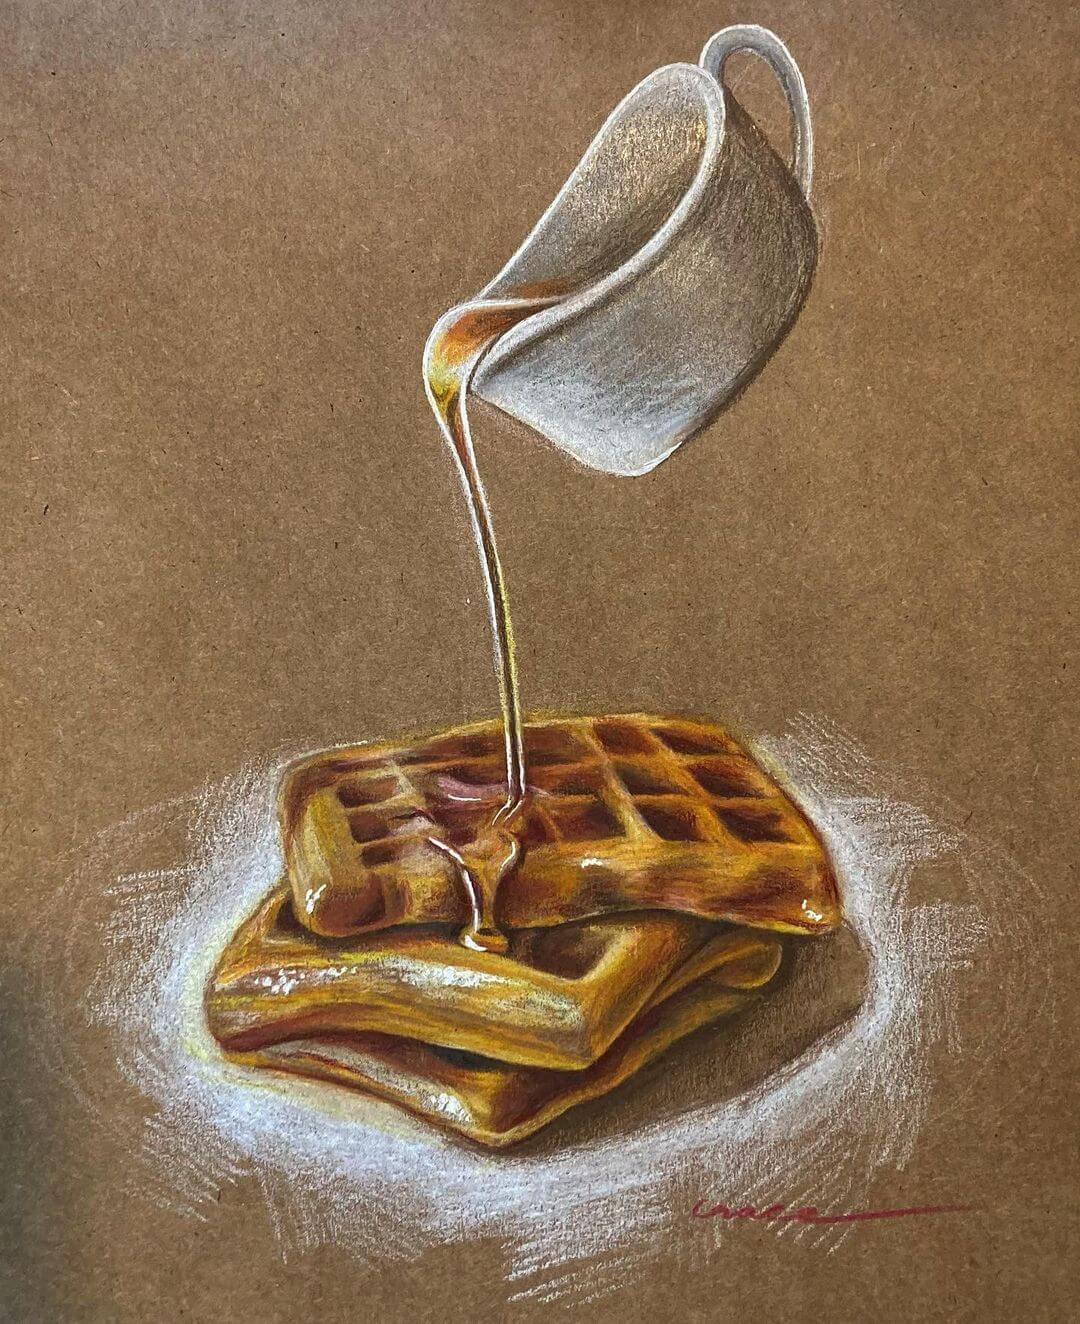 A realistic drawing of waffles with maple syrup on top, drawn on kraft paper.